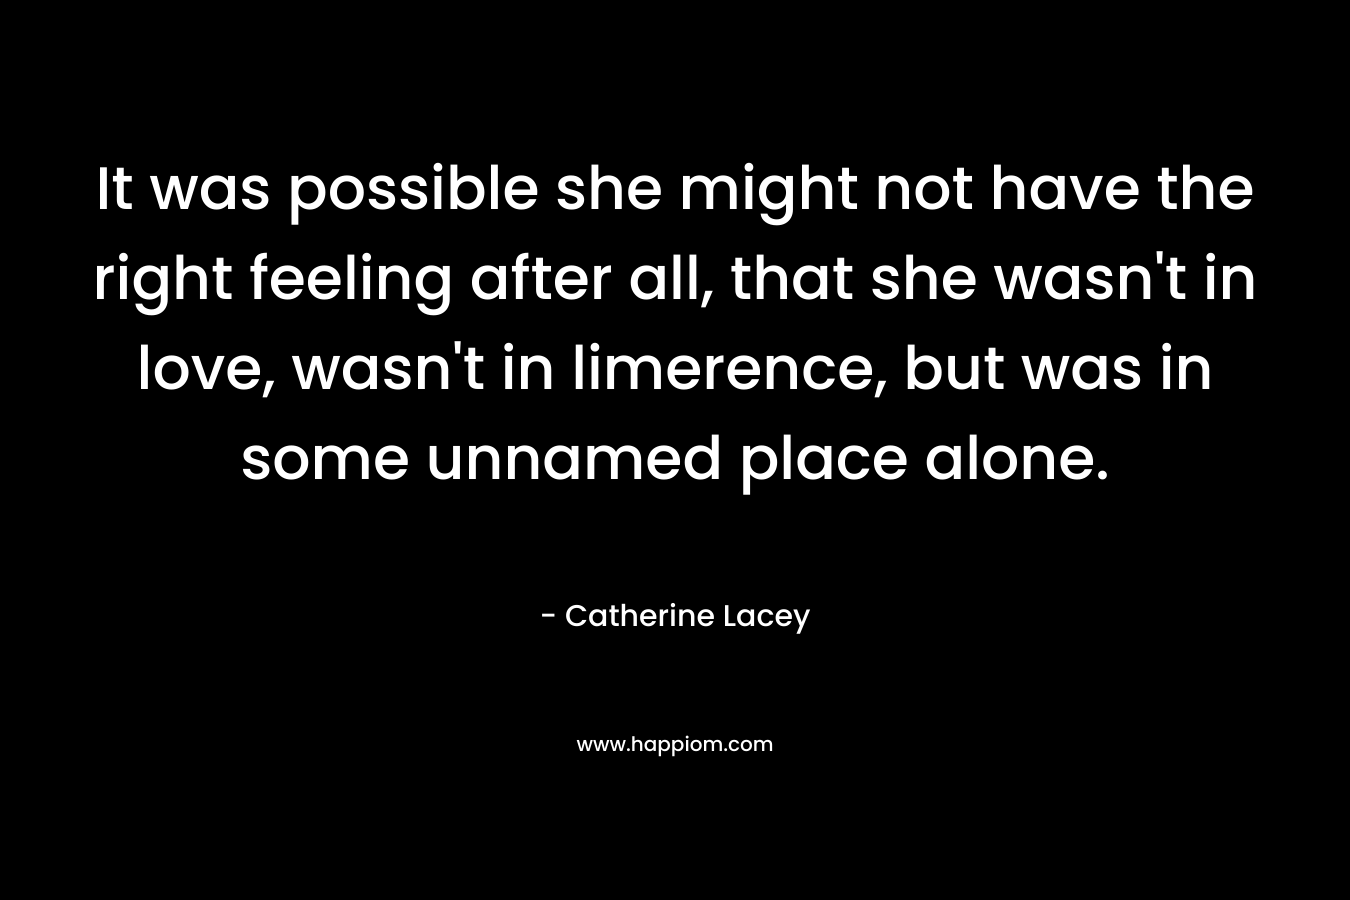 It was possible she might not have the right feeling after all, that she wasn’t in love, wasn’t in limerence, but was in some unnamed place alone. – Catherine Lacey